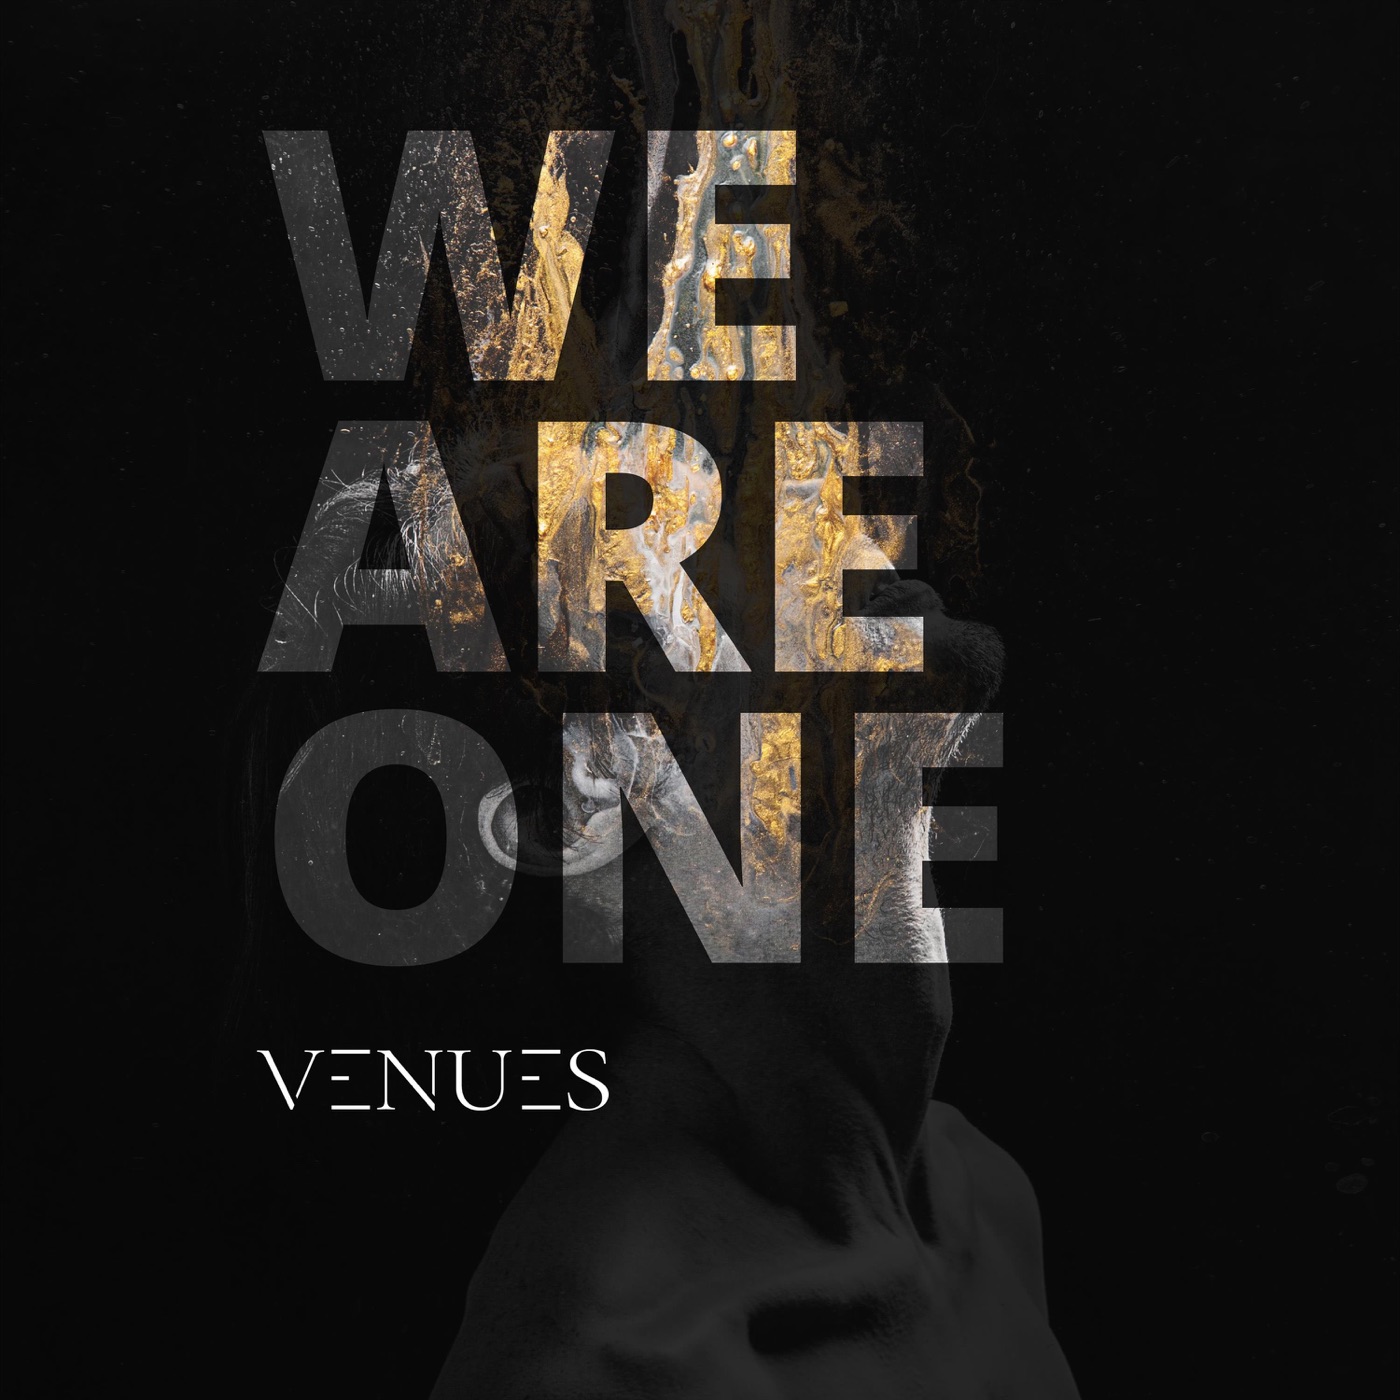 Venues - We Are One [single] (2018)